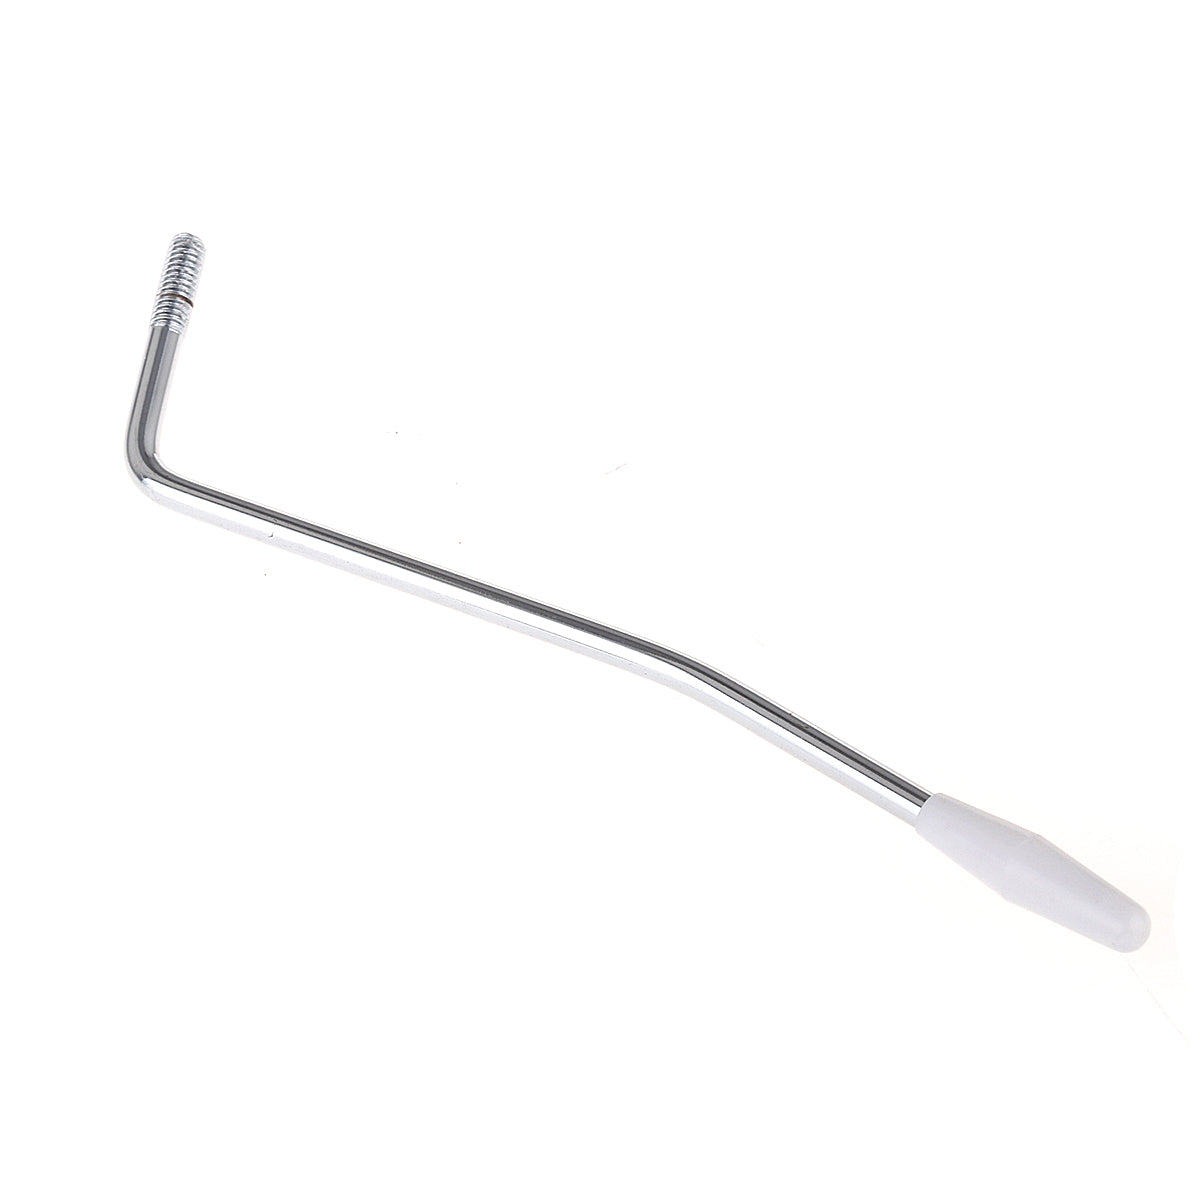 Musiclily 6mm Tremolo Arm Whammy Bar Vibrato Arm for Electric Guitar,Chrome with White Tip